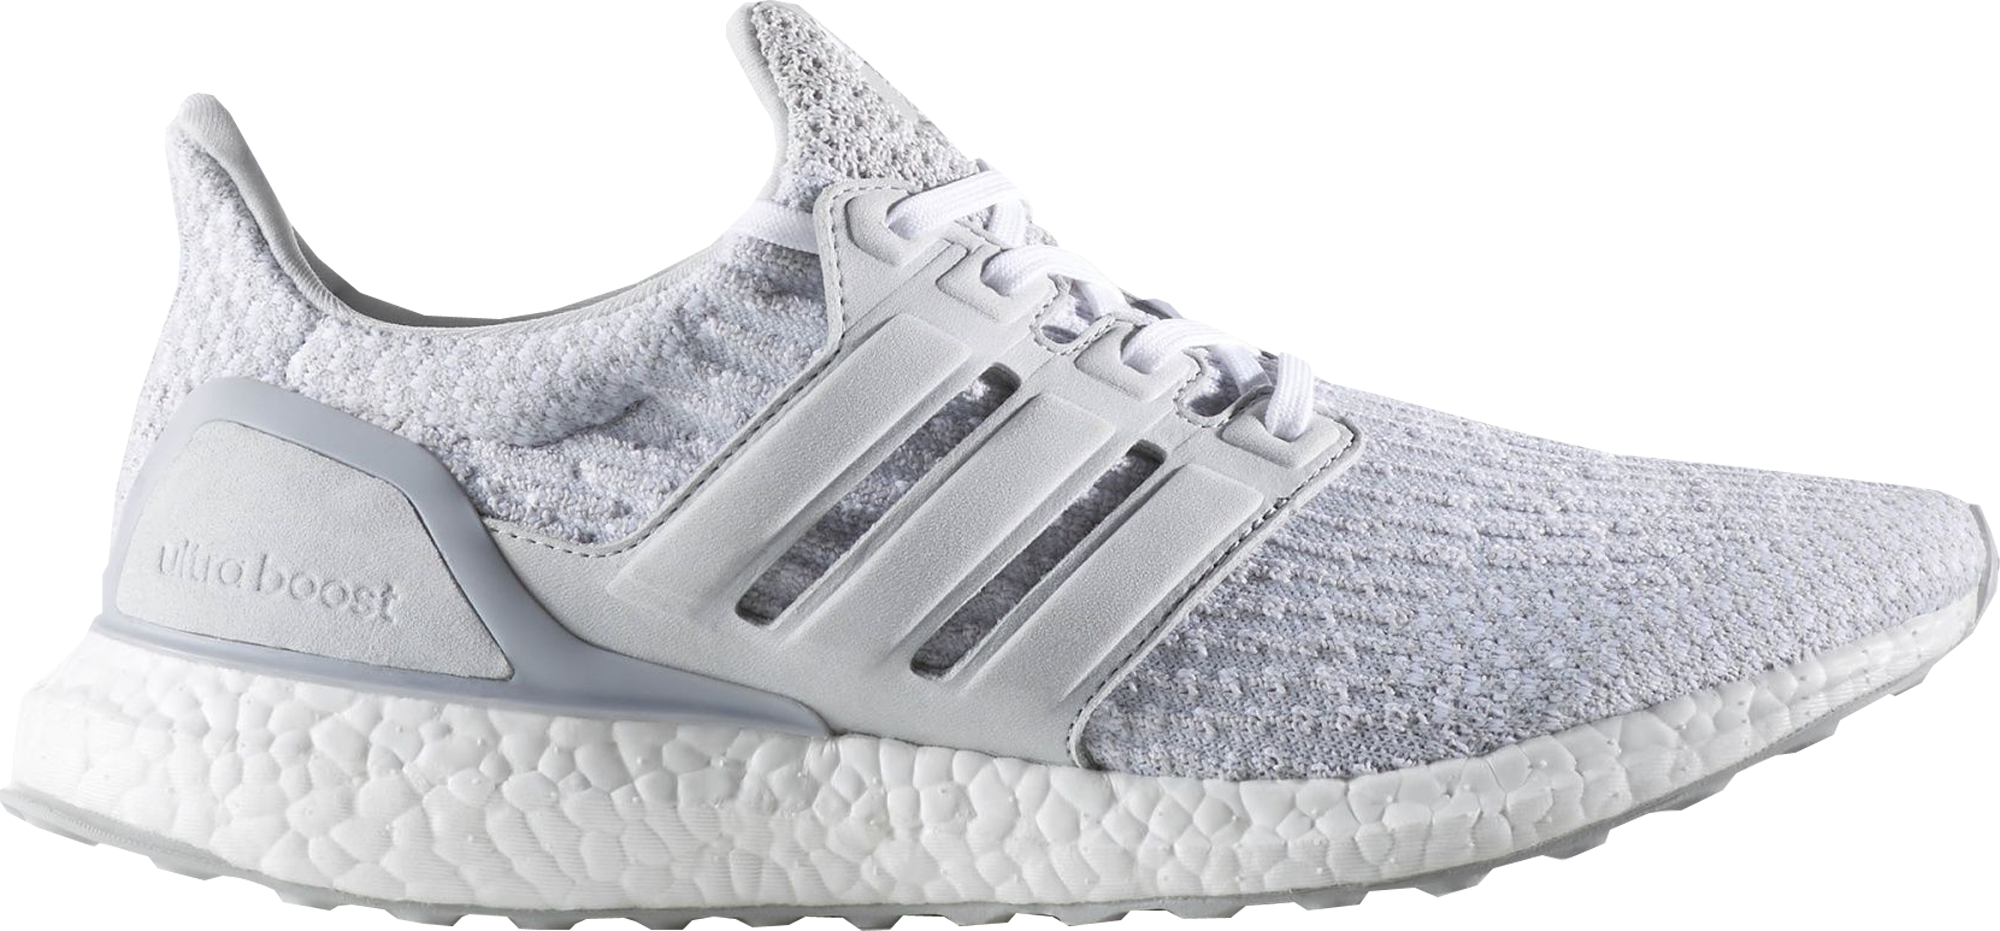 adidas Ultra Boost 3.0 Reigning Champ 